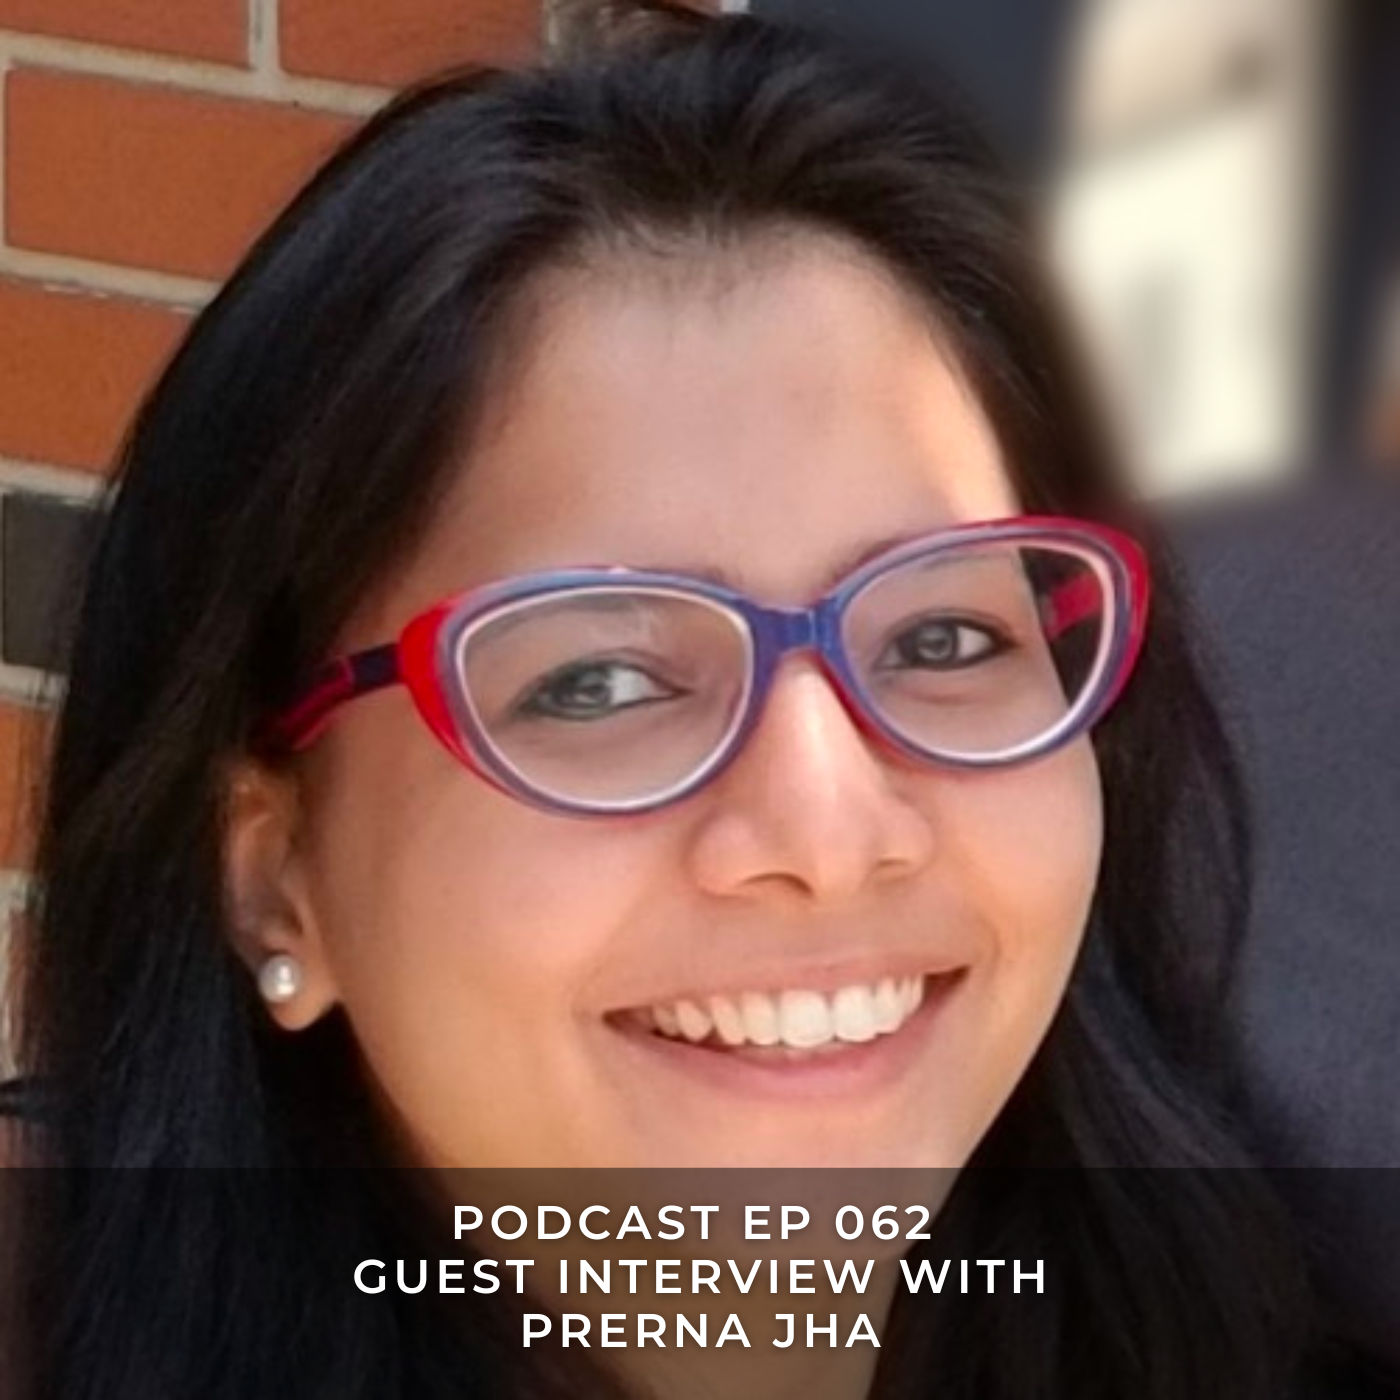 Guest Interview with Prerna Jha